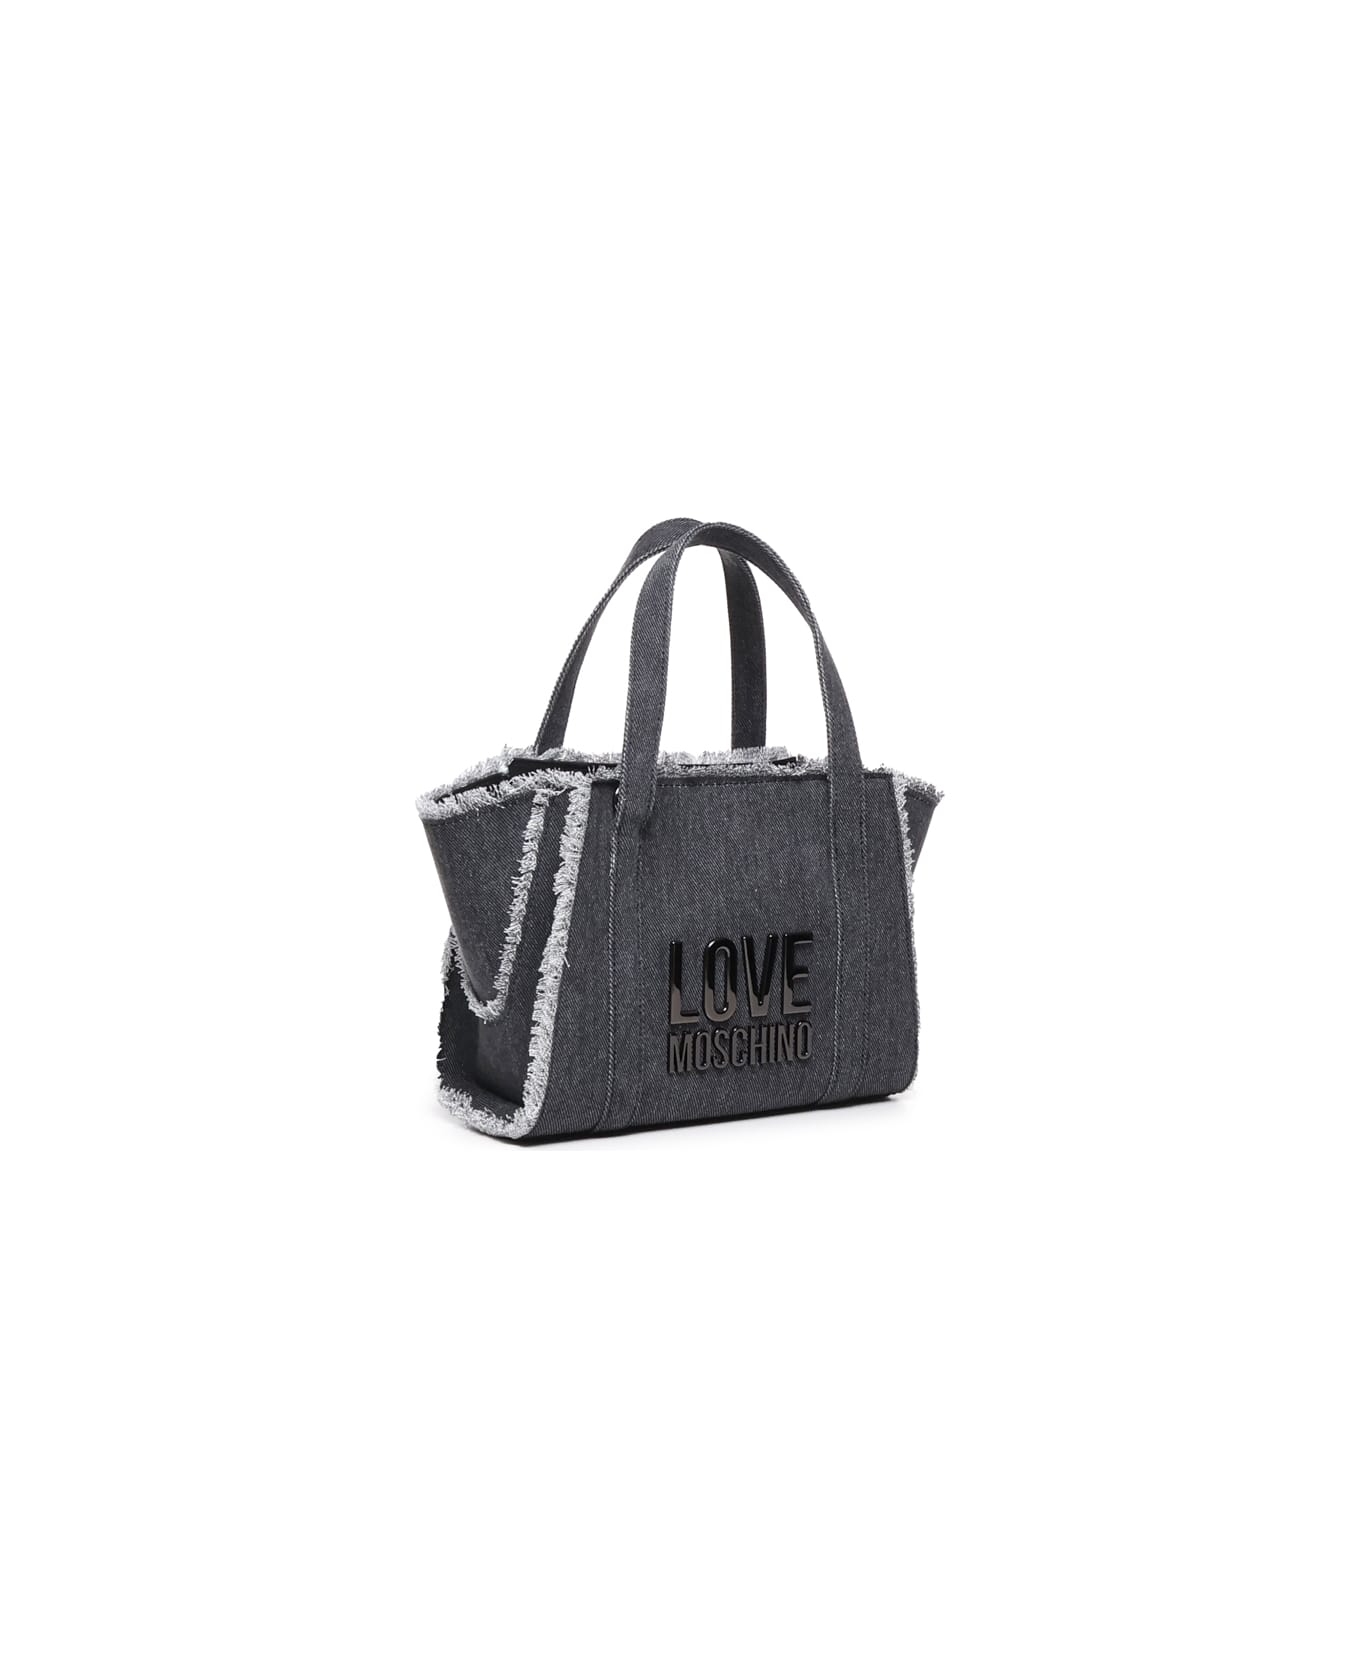 Love Moschino Tote Bag With Fringes - Black